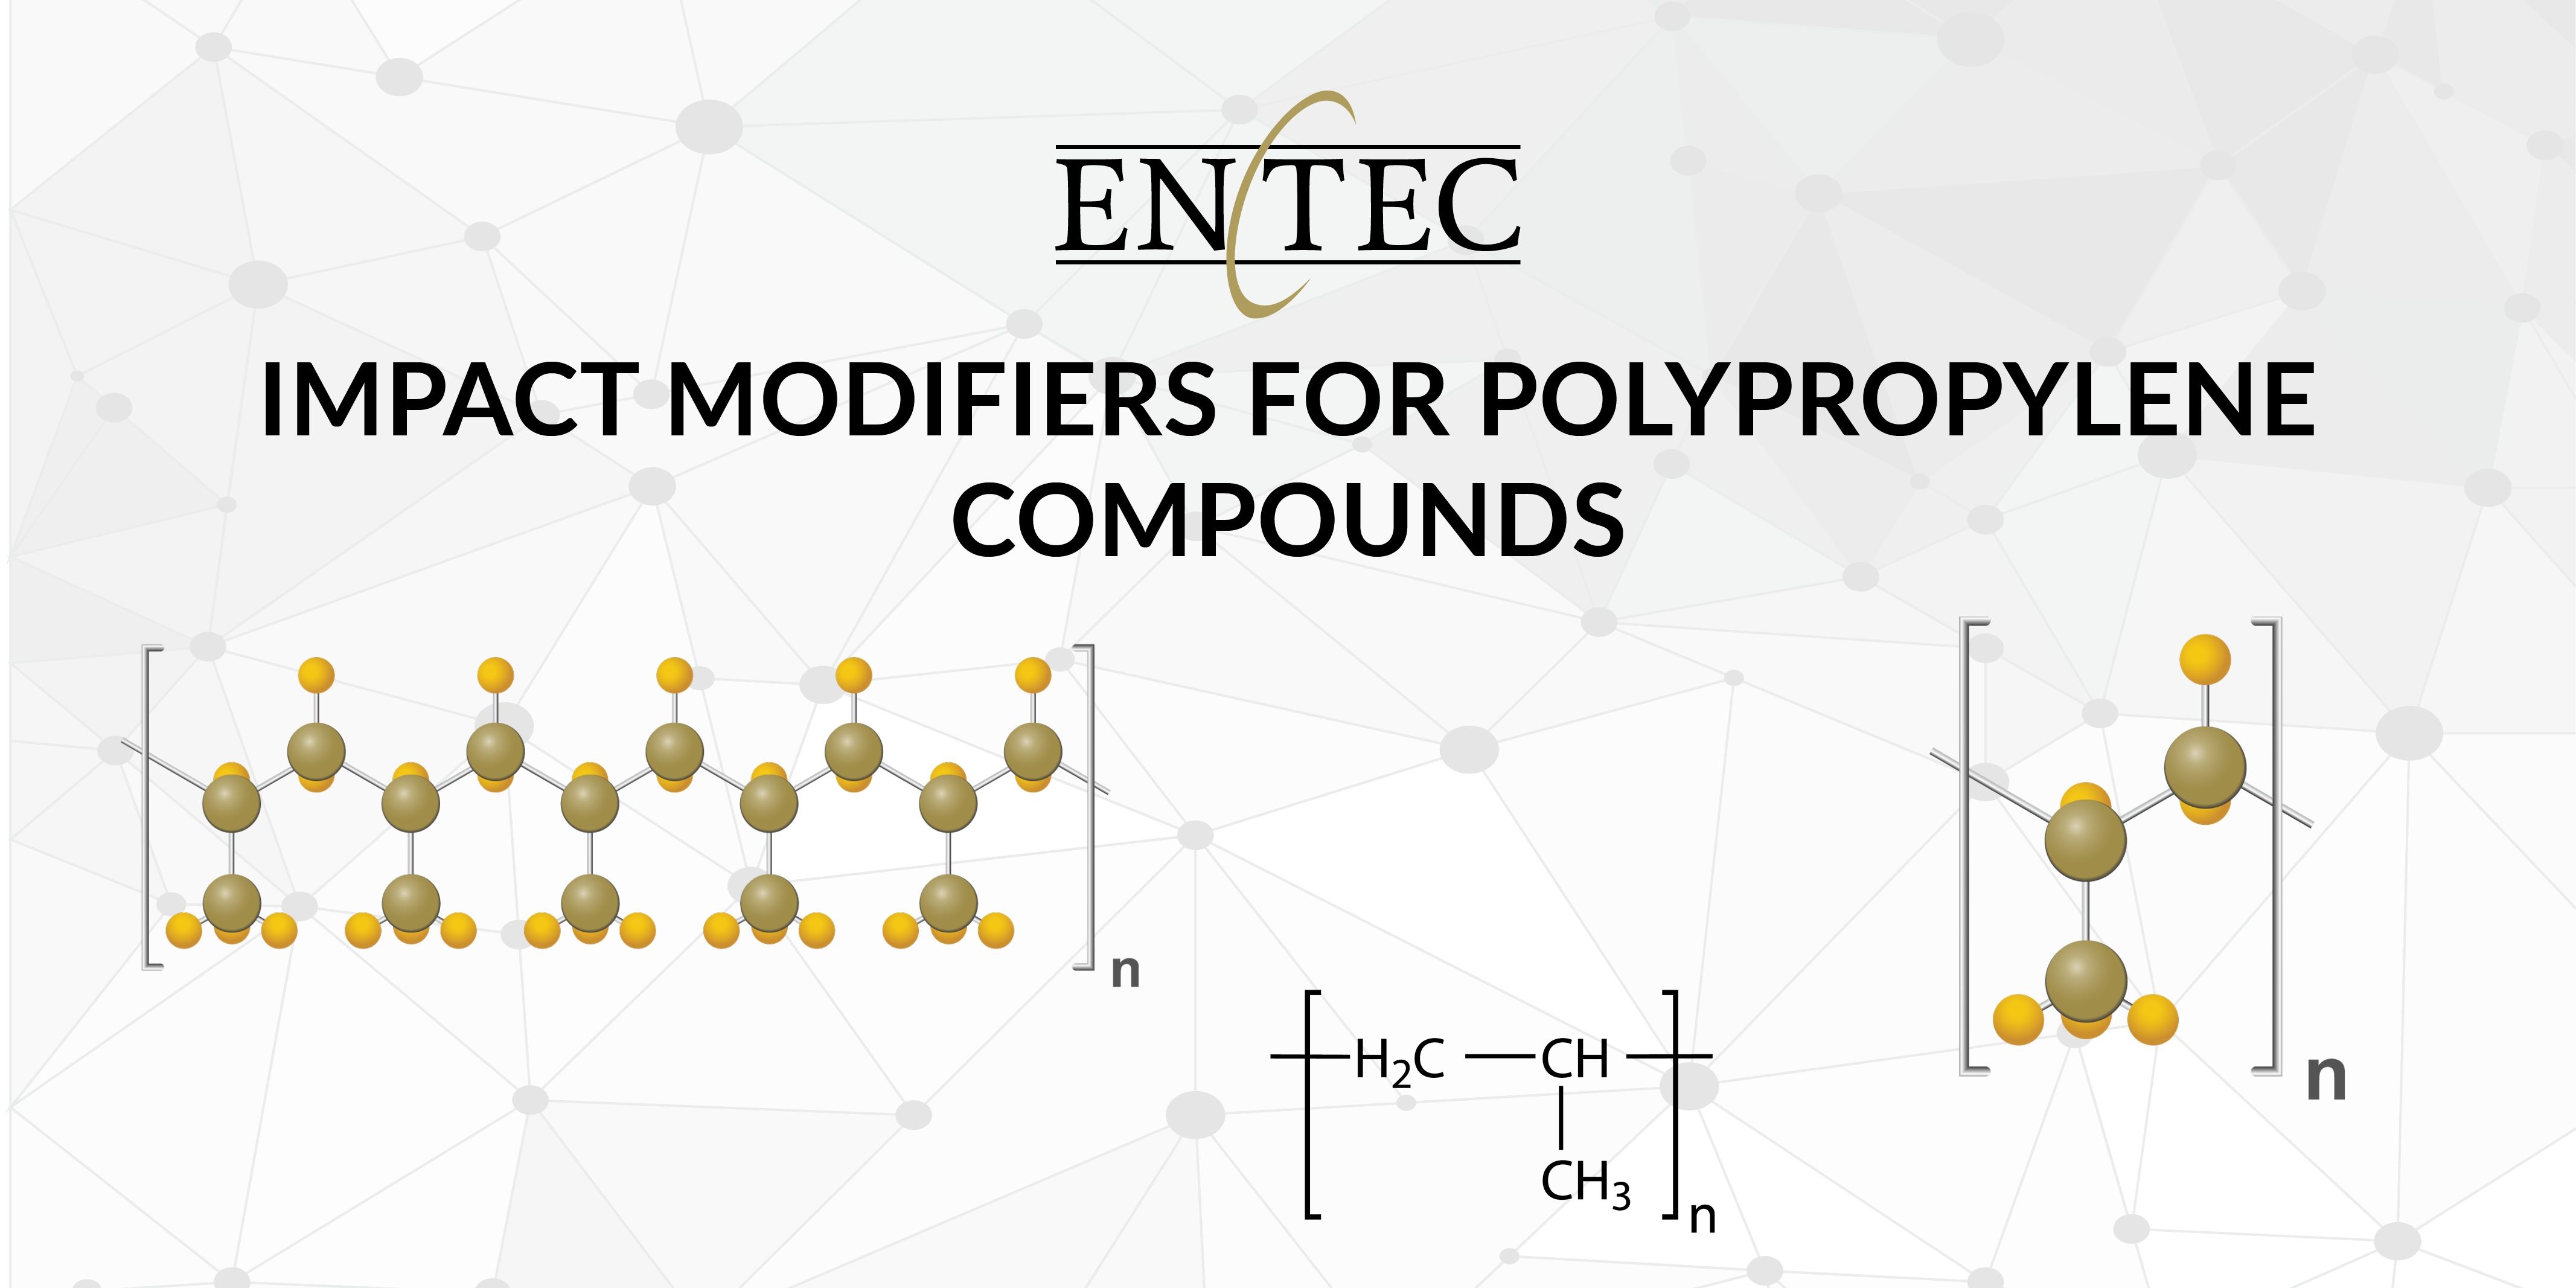 Impact Modifiers for Polypropylene Compounds Social Media Post